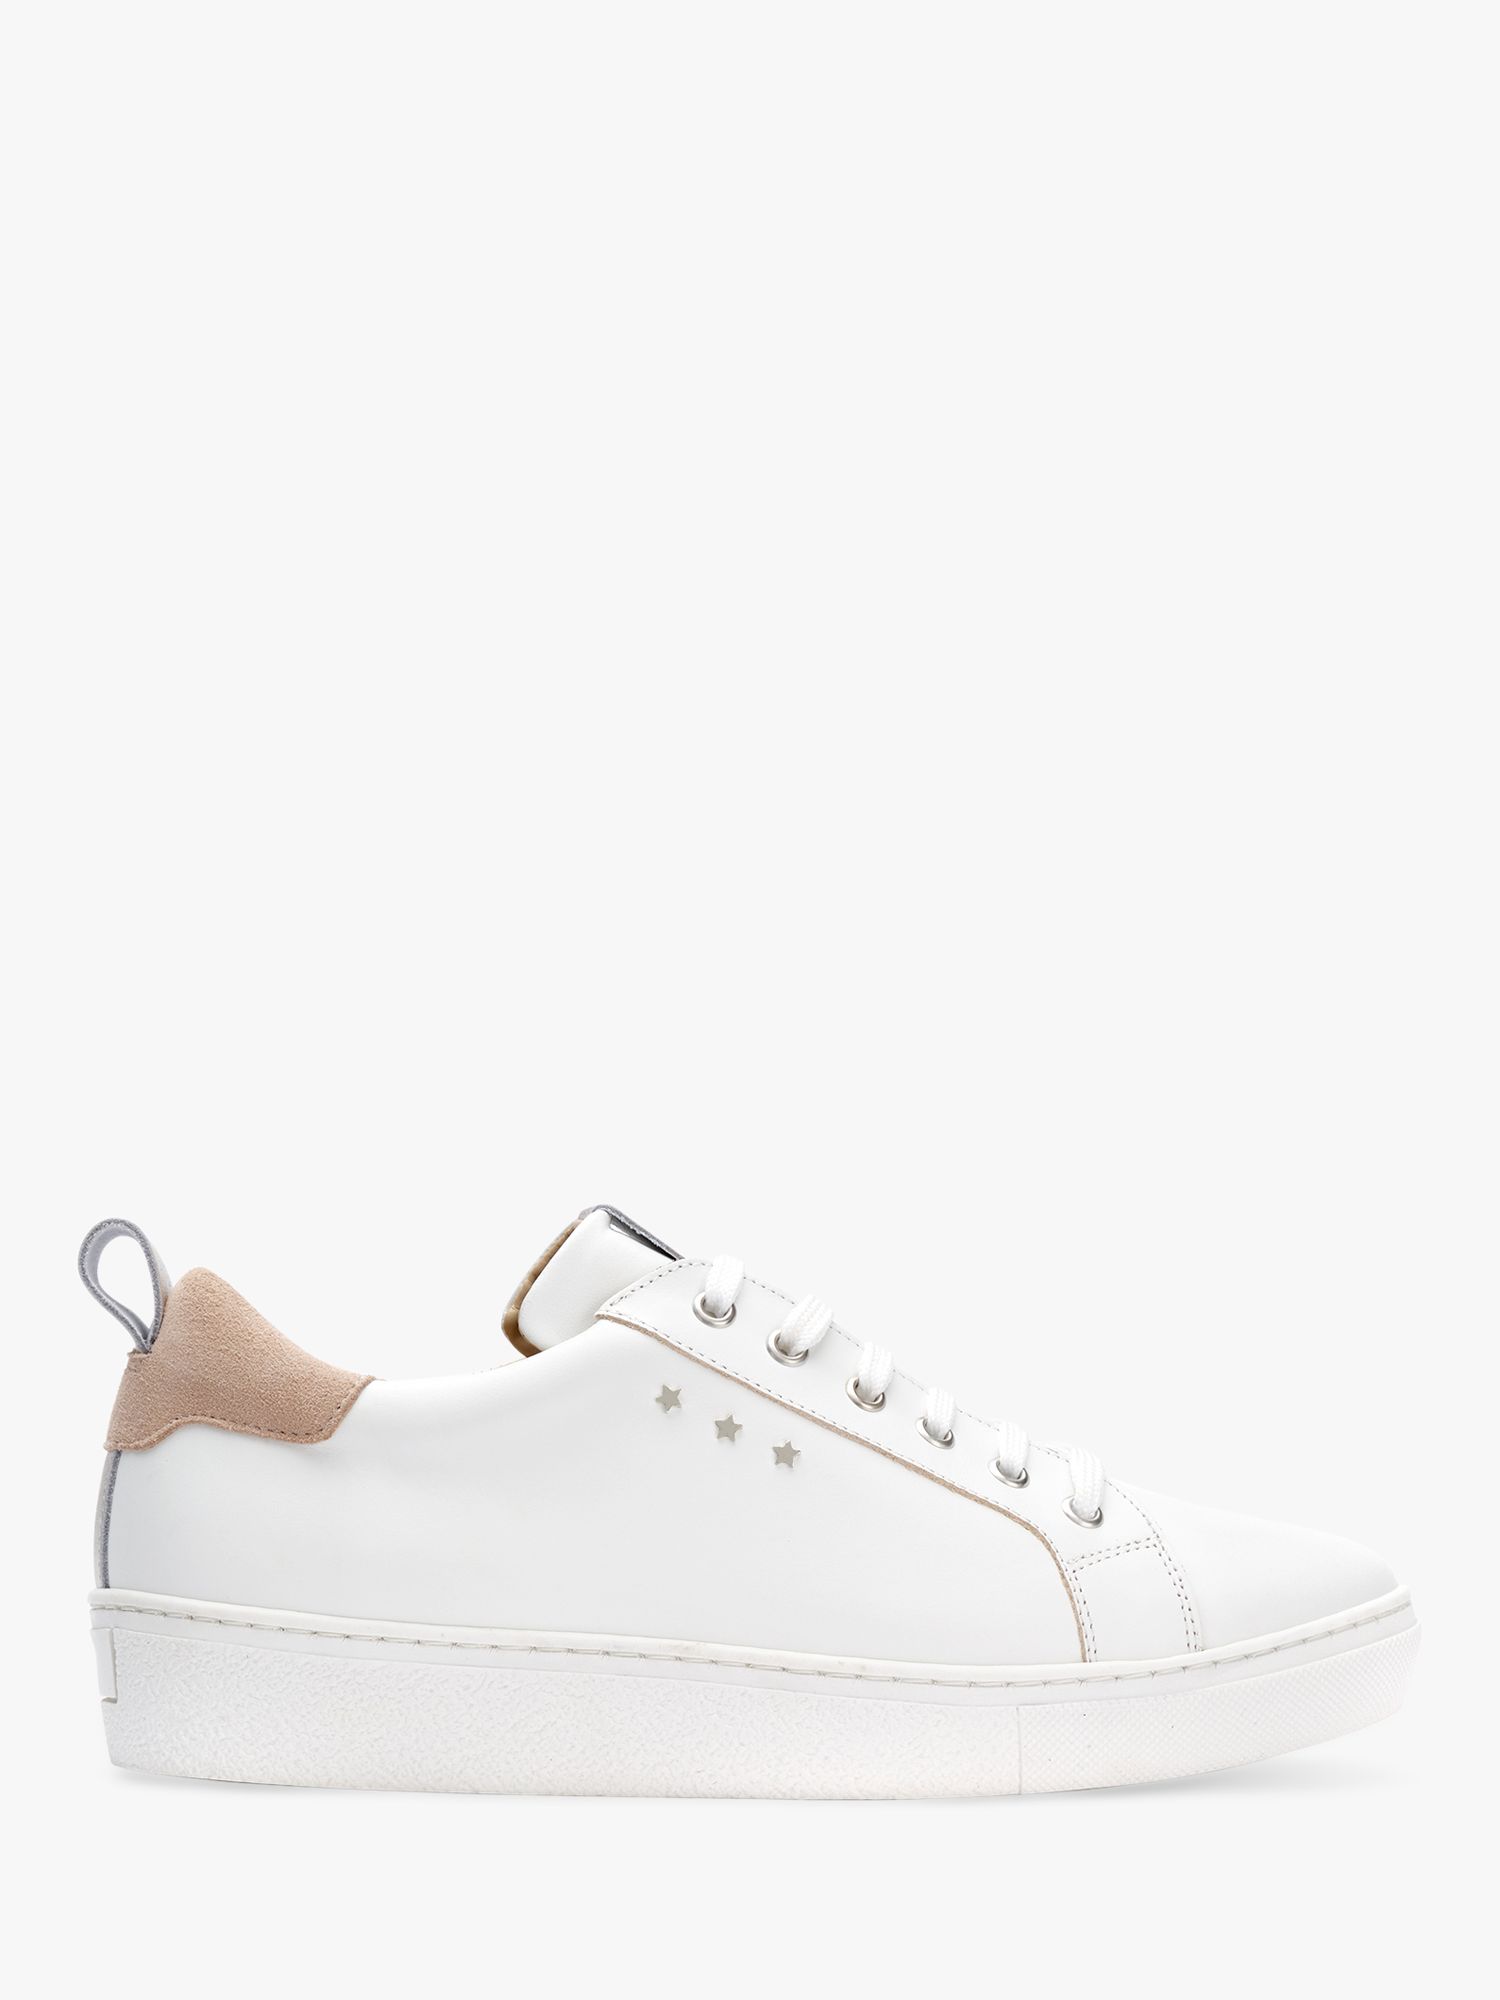 Mint Velvet Allie Leather Star Stud Lace Up Trainers, White/Natural